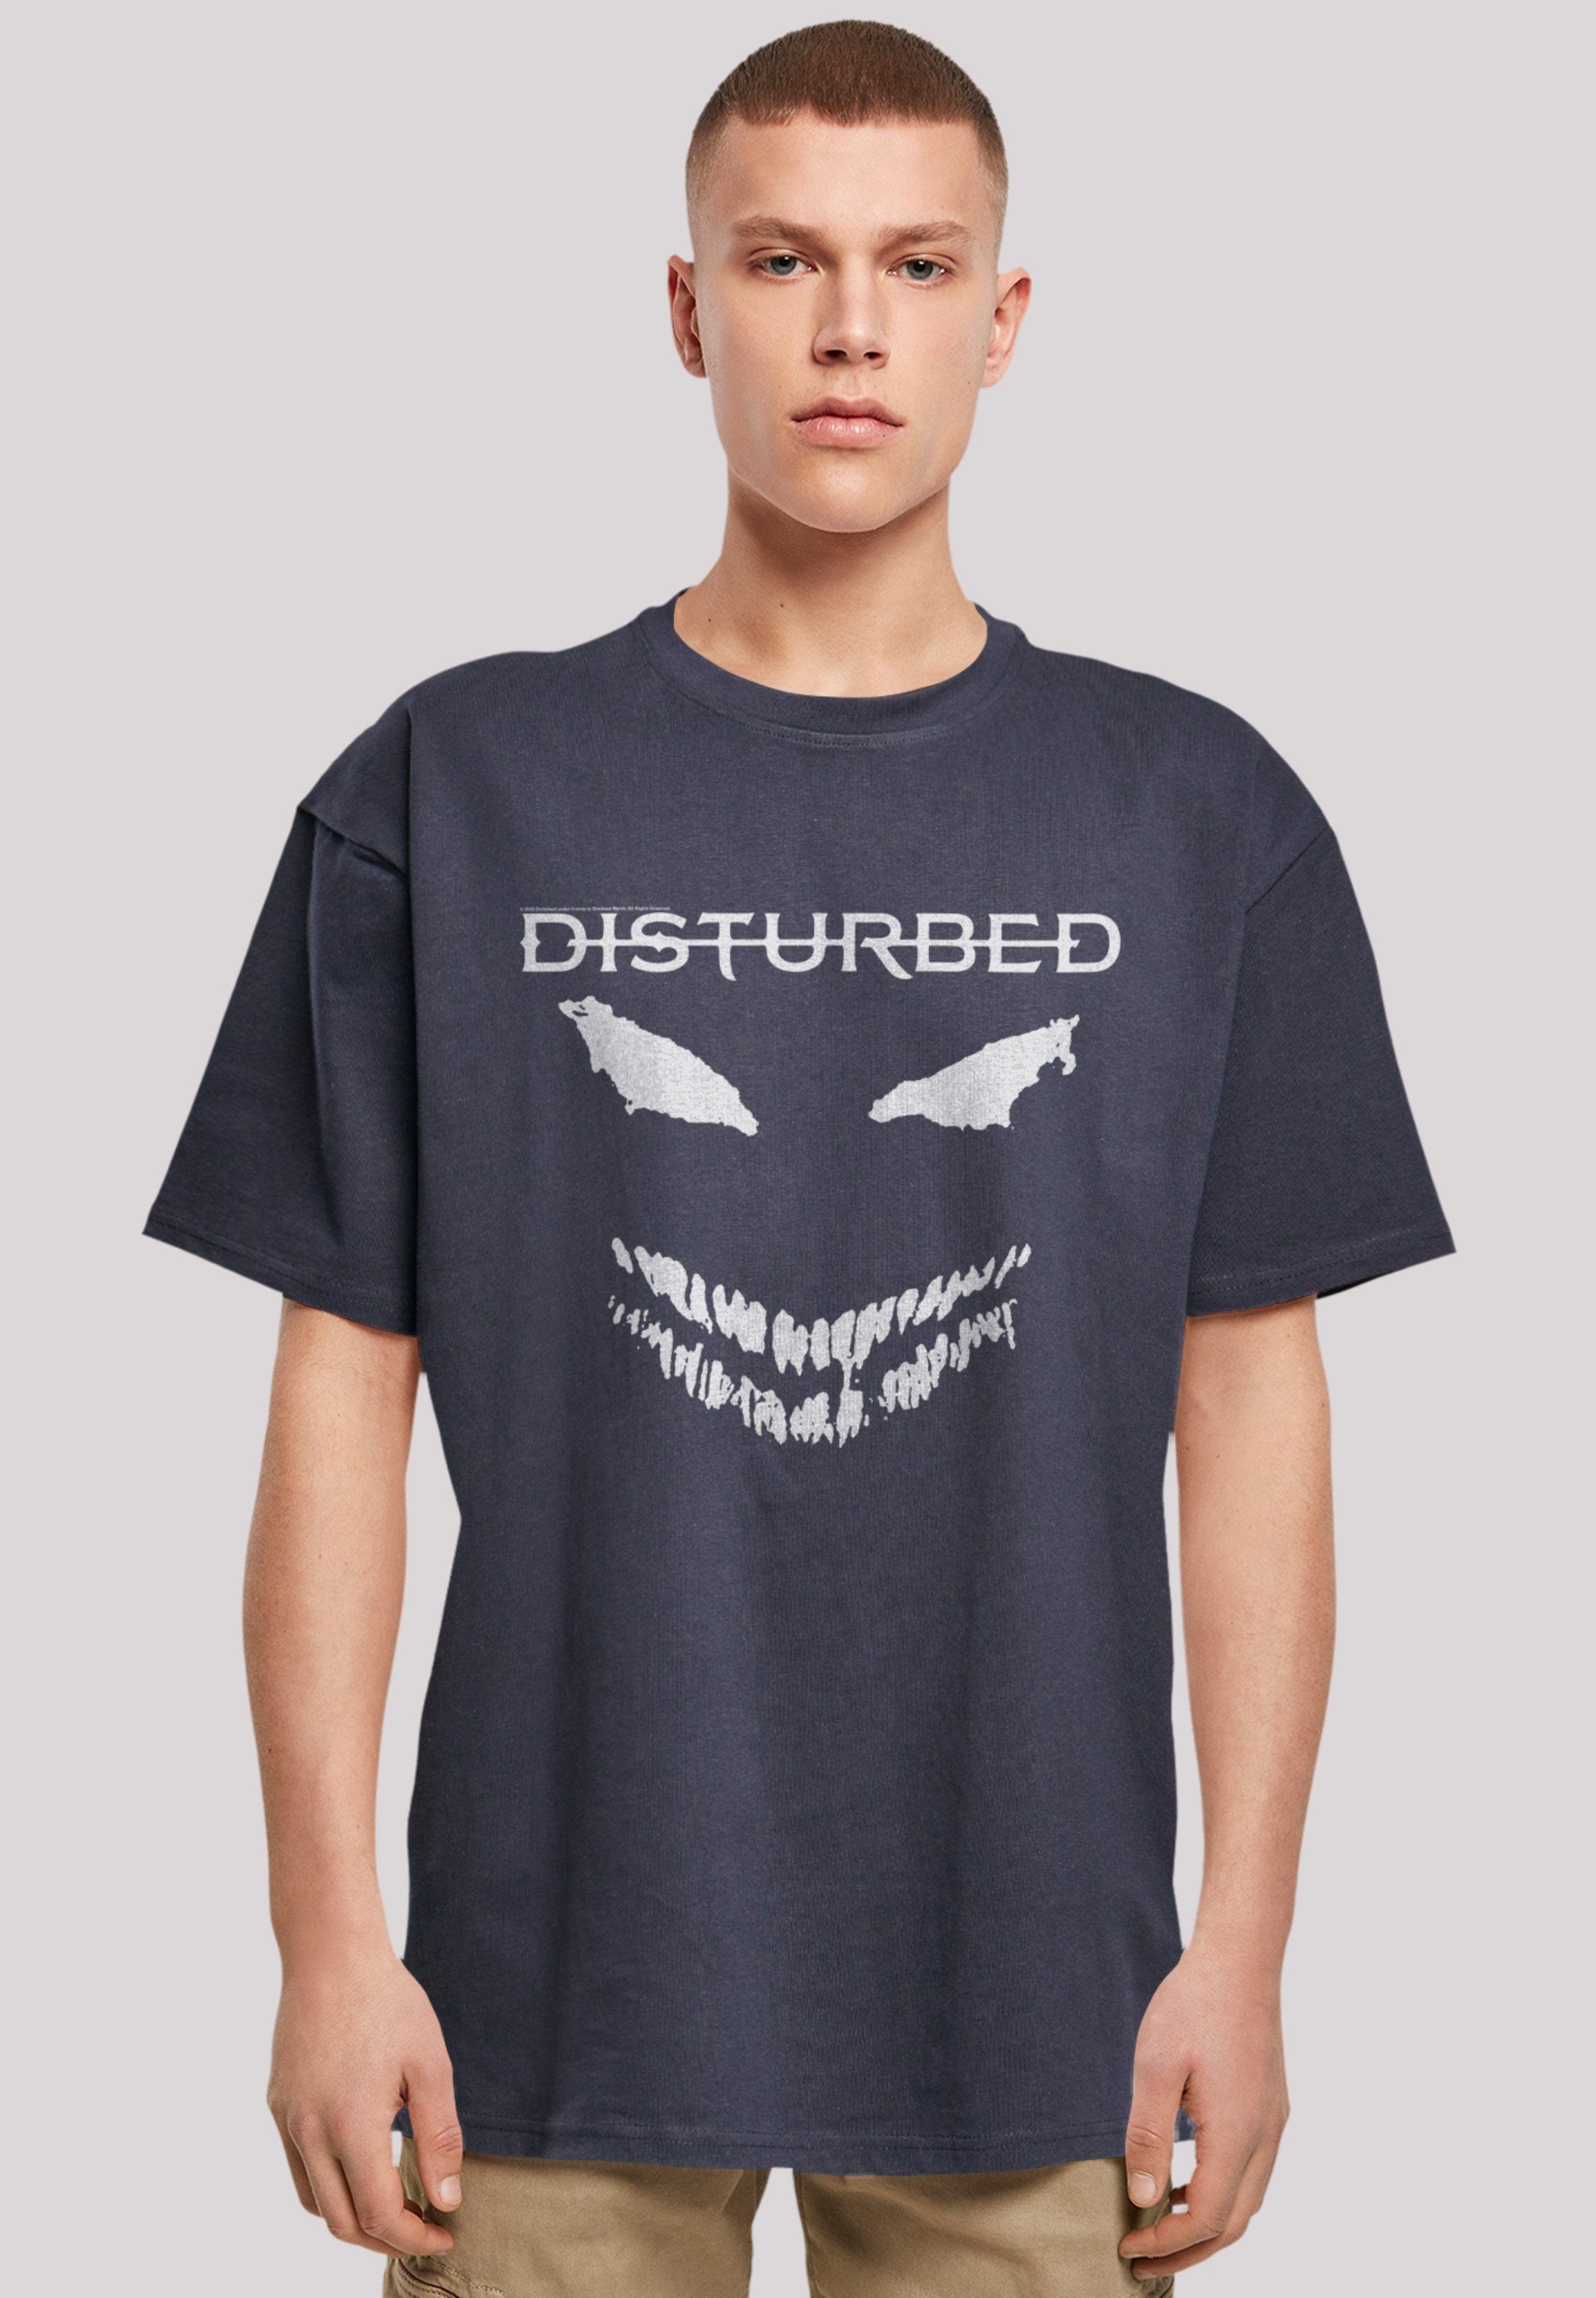 F4NT4STIC T-Shirt Disturbed Heavy Metal Scary Face Candle Premium Qualität, Rock-Musik, Band navy